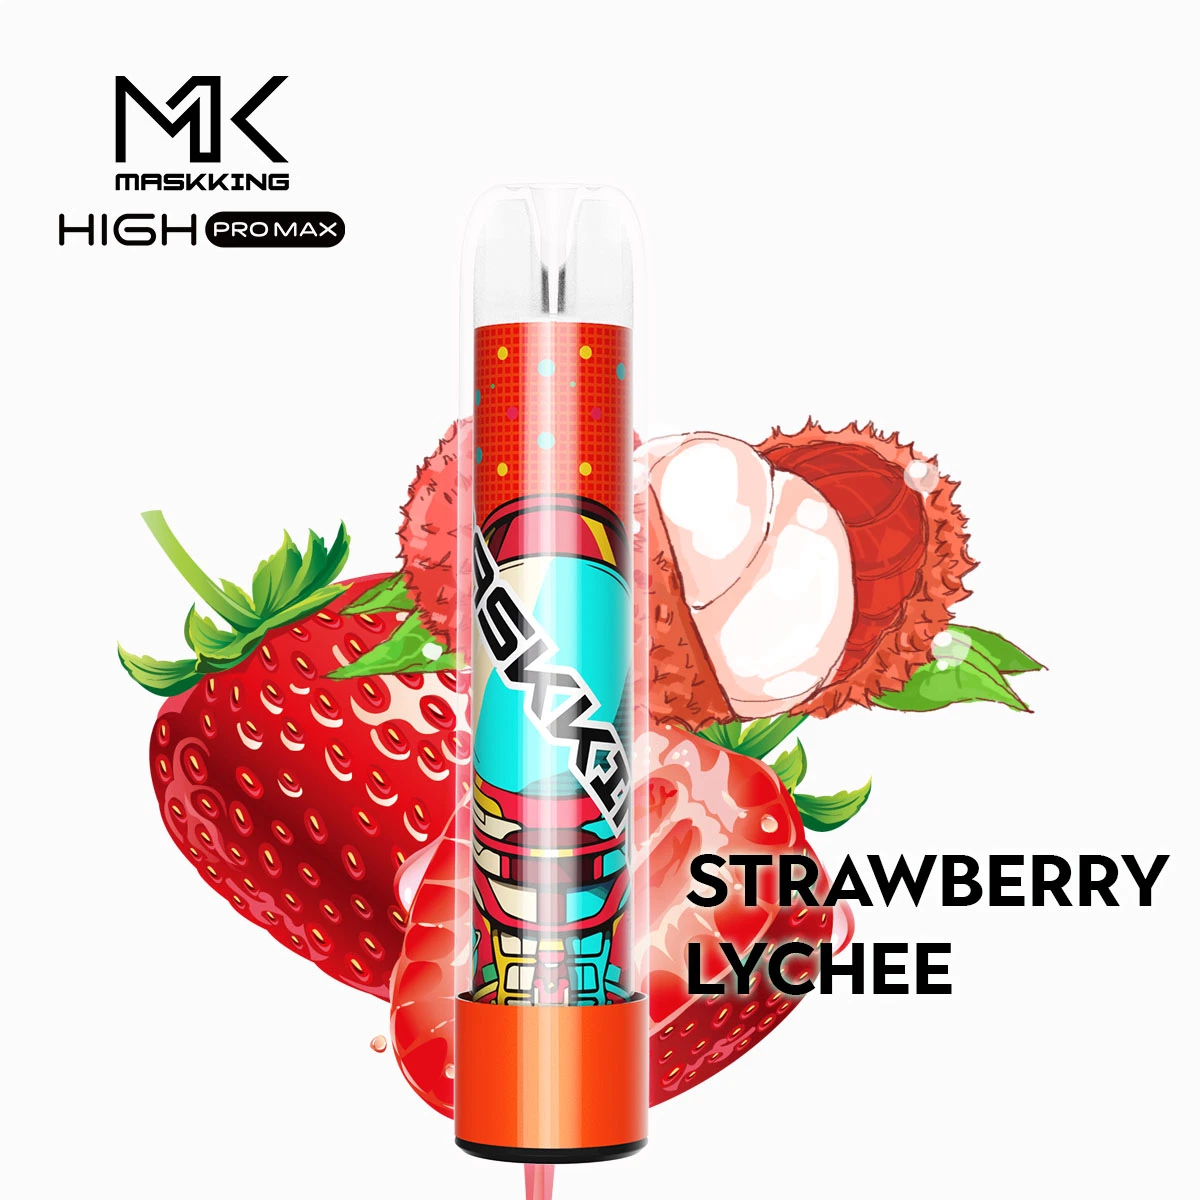 Maskking PRO Max Taste 2 in 1 1500 Puffs Disposable/Chargeable Vape Pen with 4.5ml Pod 13 Colors Available Disposable/Chargeable Device